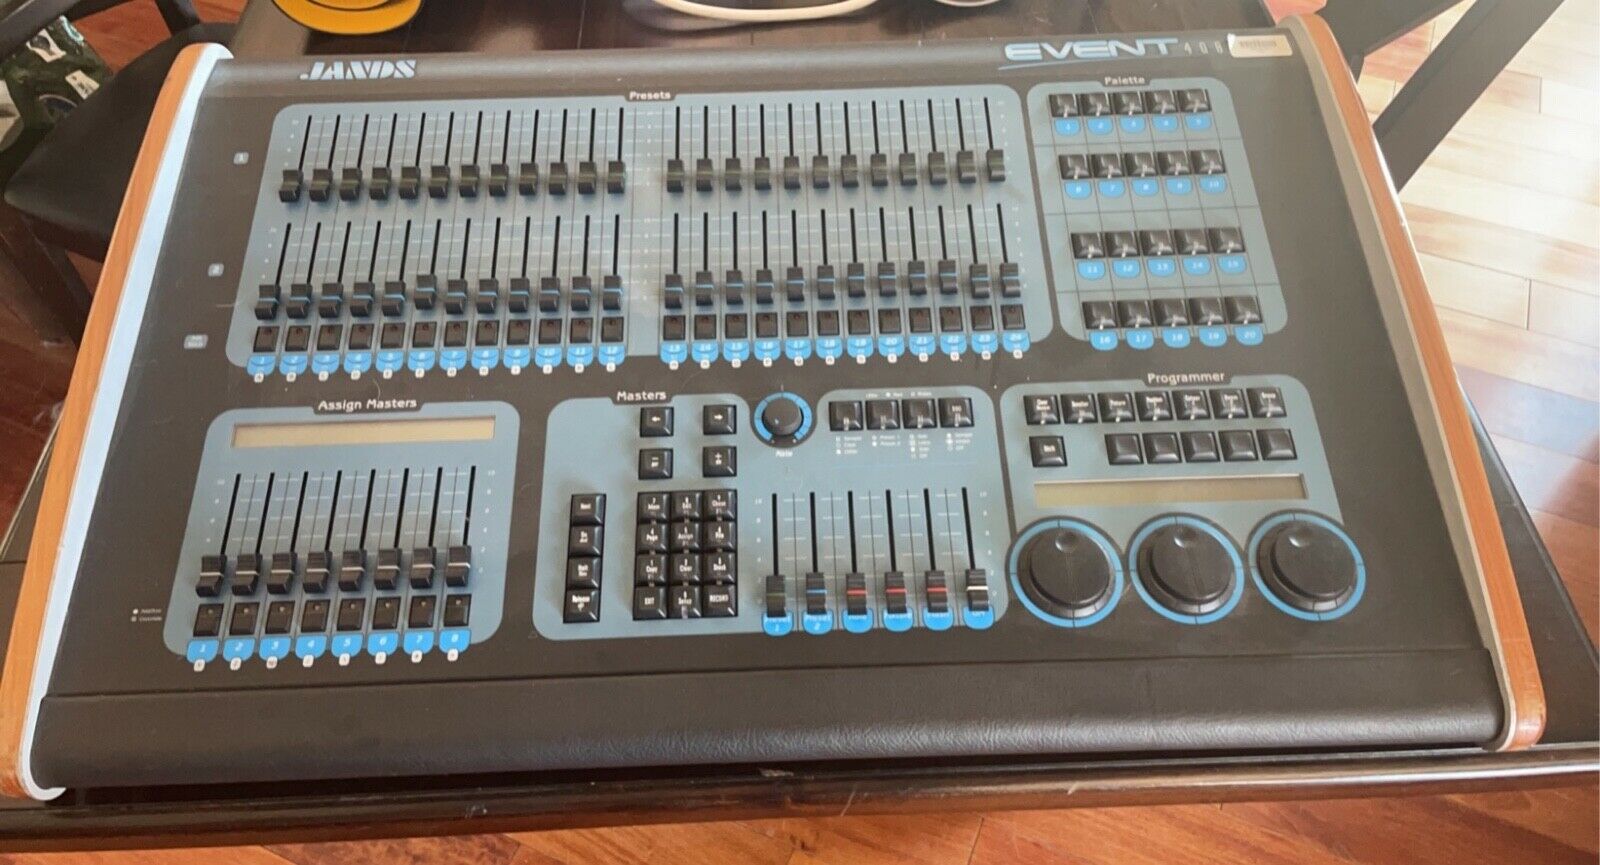 Jands Event 408 DMX Lighting Console -- Used with some scratches